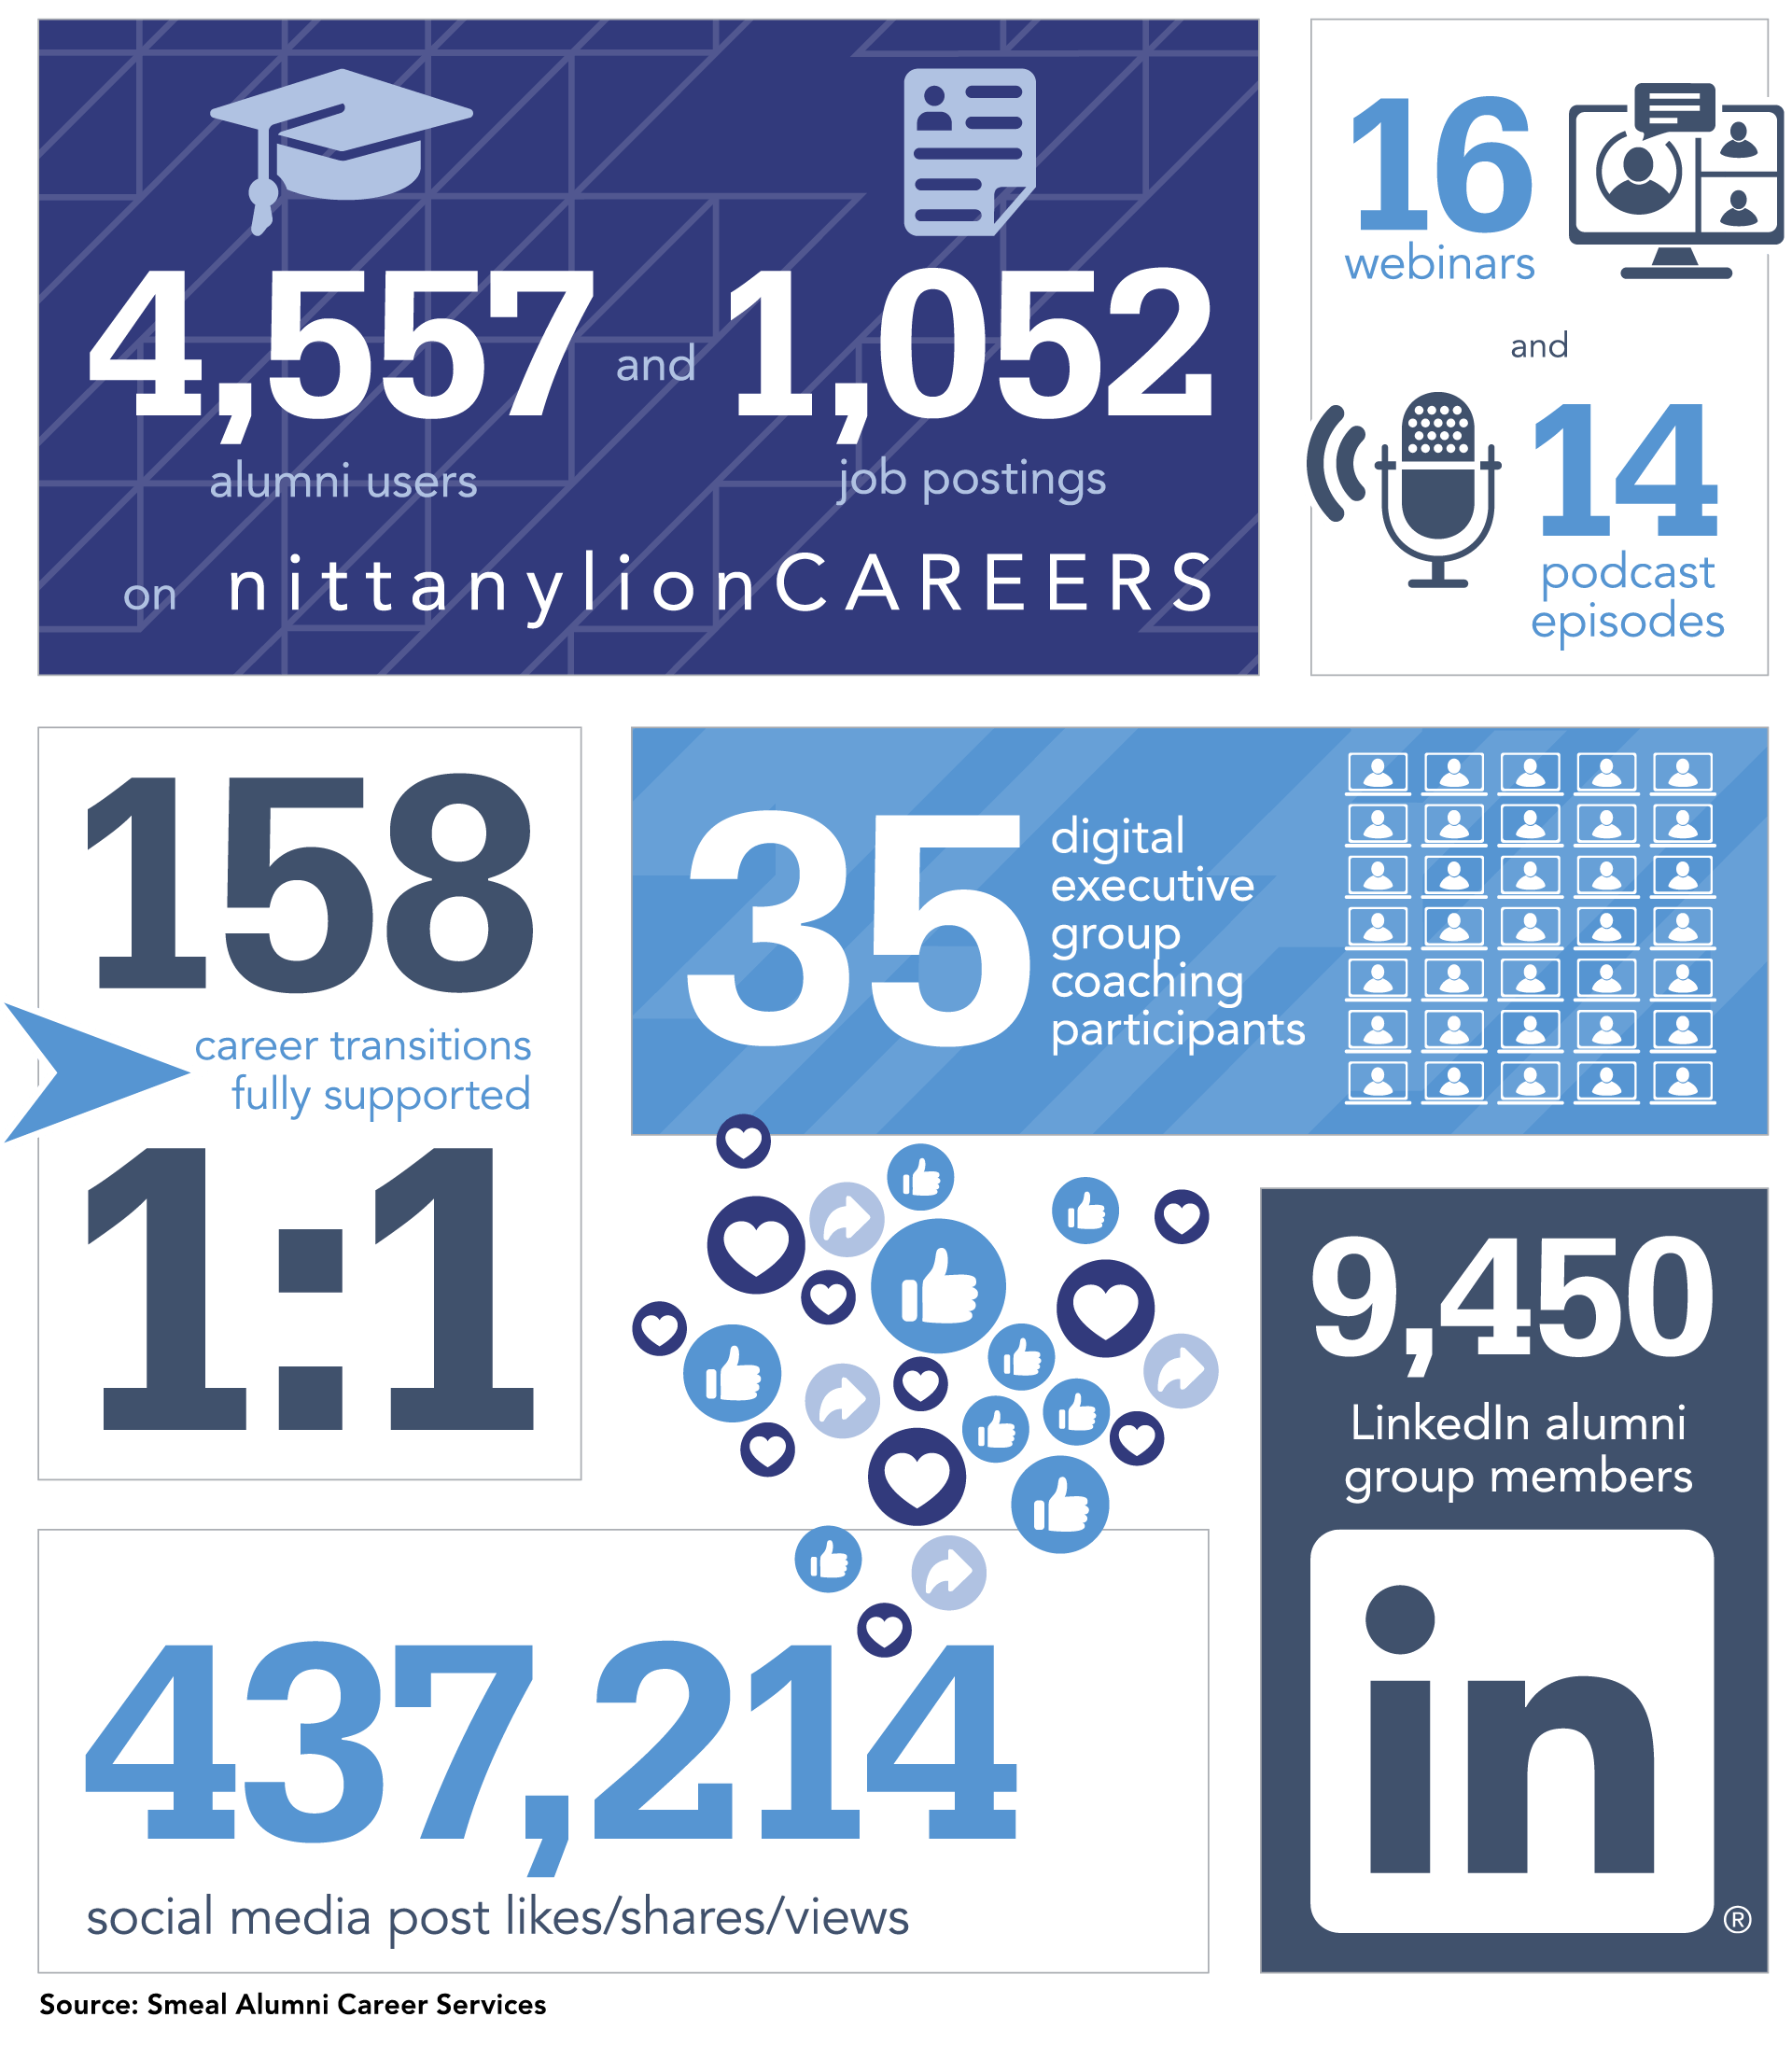 4,557 alumni users and 1,032 job postings on nittanylionCAREERS, 16 webinars and 14 podcast episodes, career transitions fully supports at 158, 35 digital executive group coaching participants, 437, 214 social media interactions, and 9,450 LinkedIn alumni group members